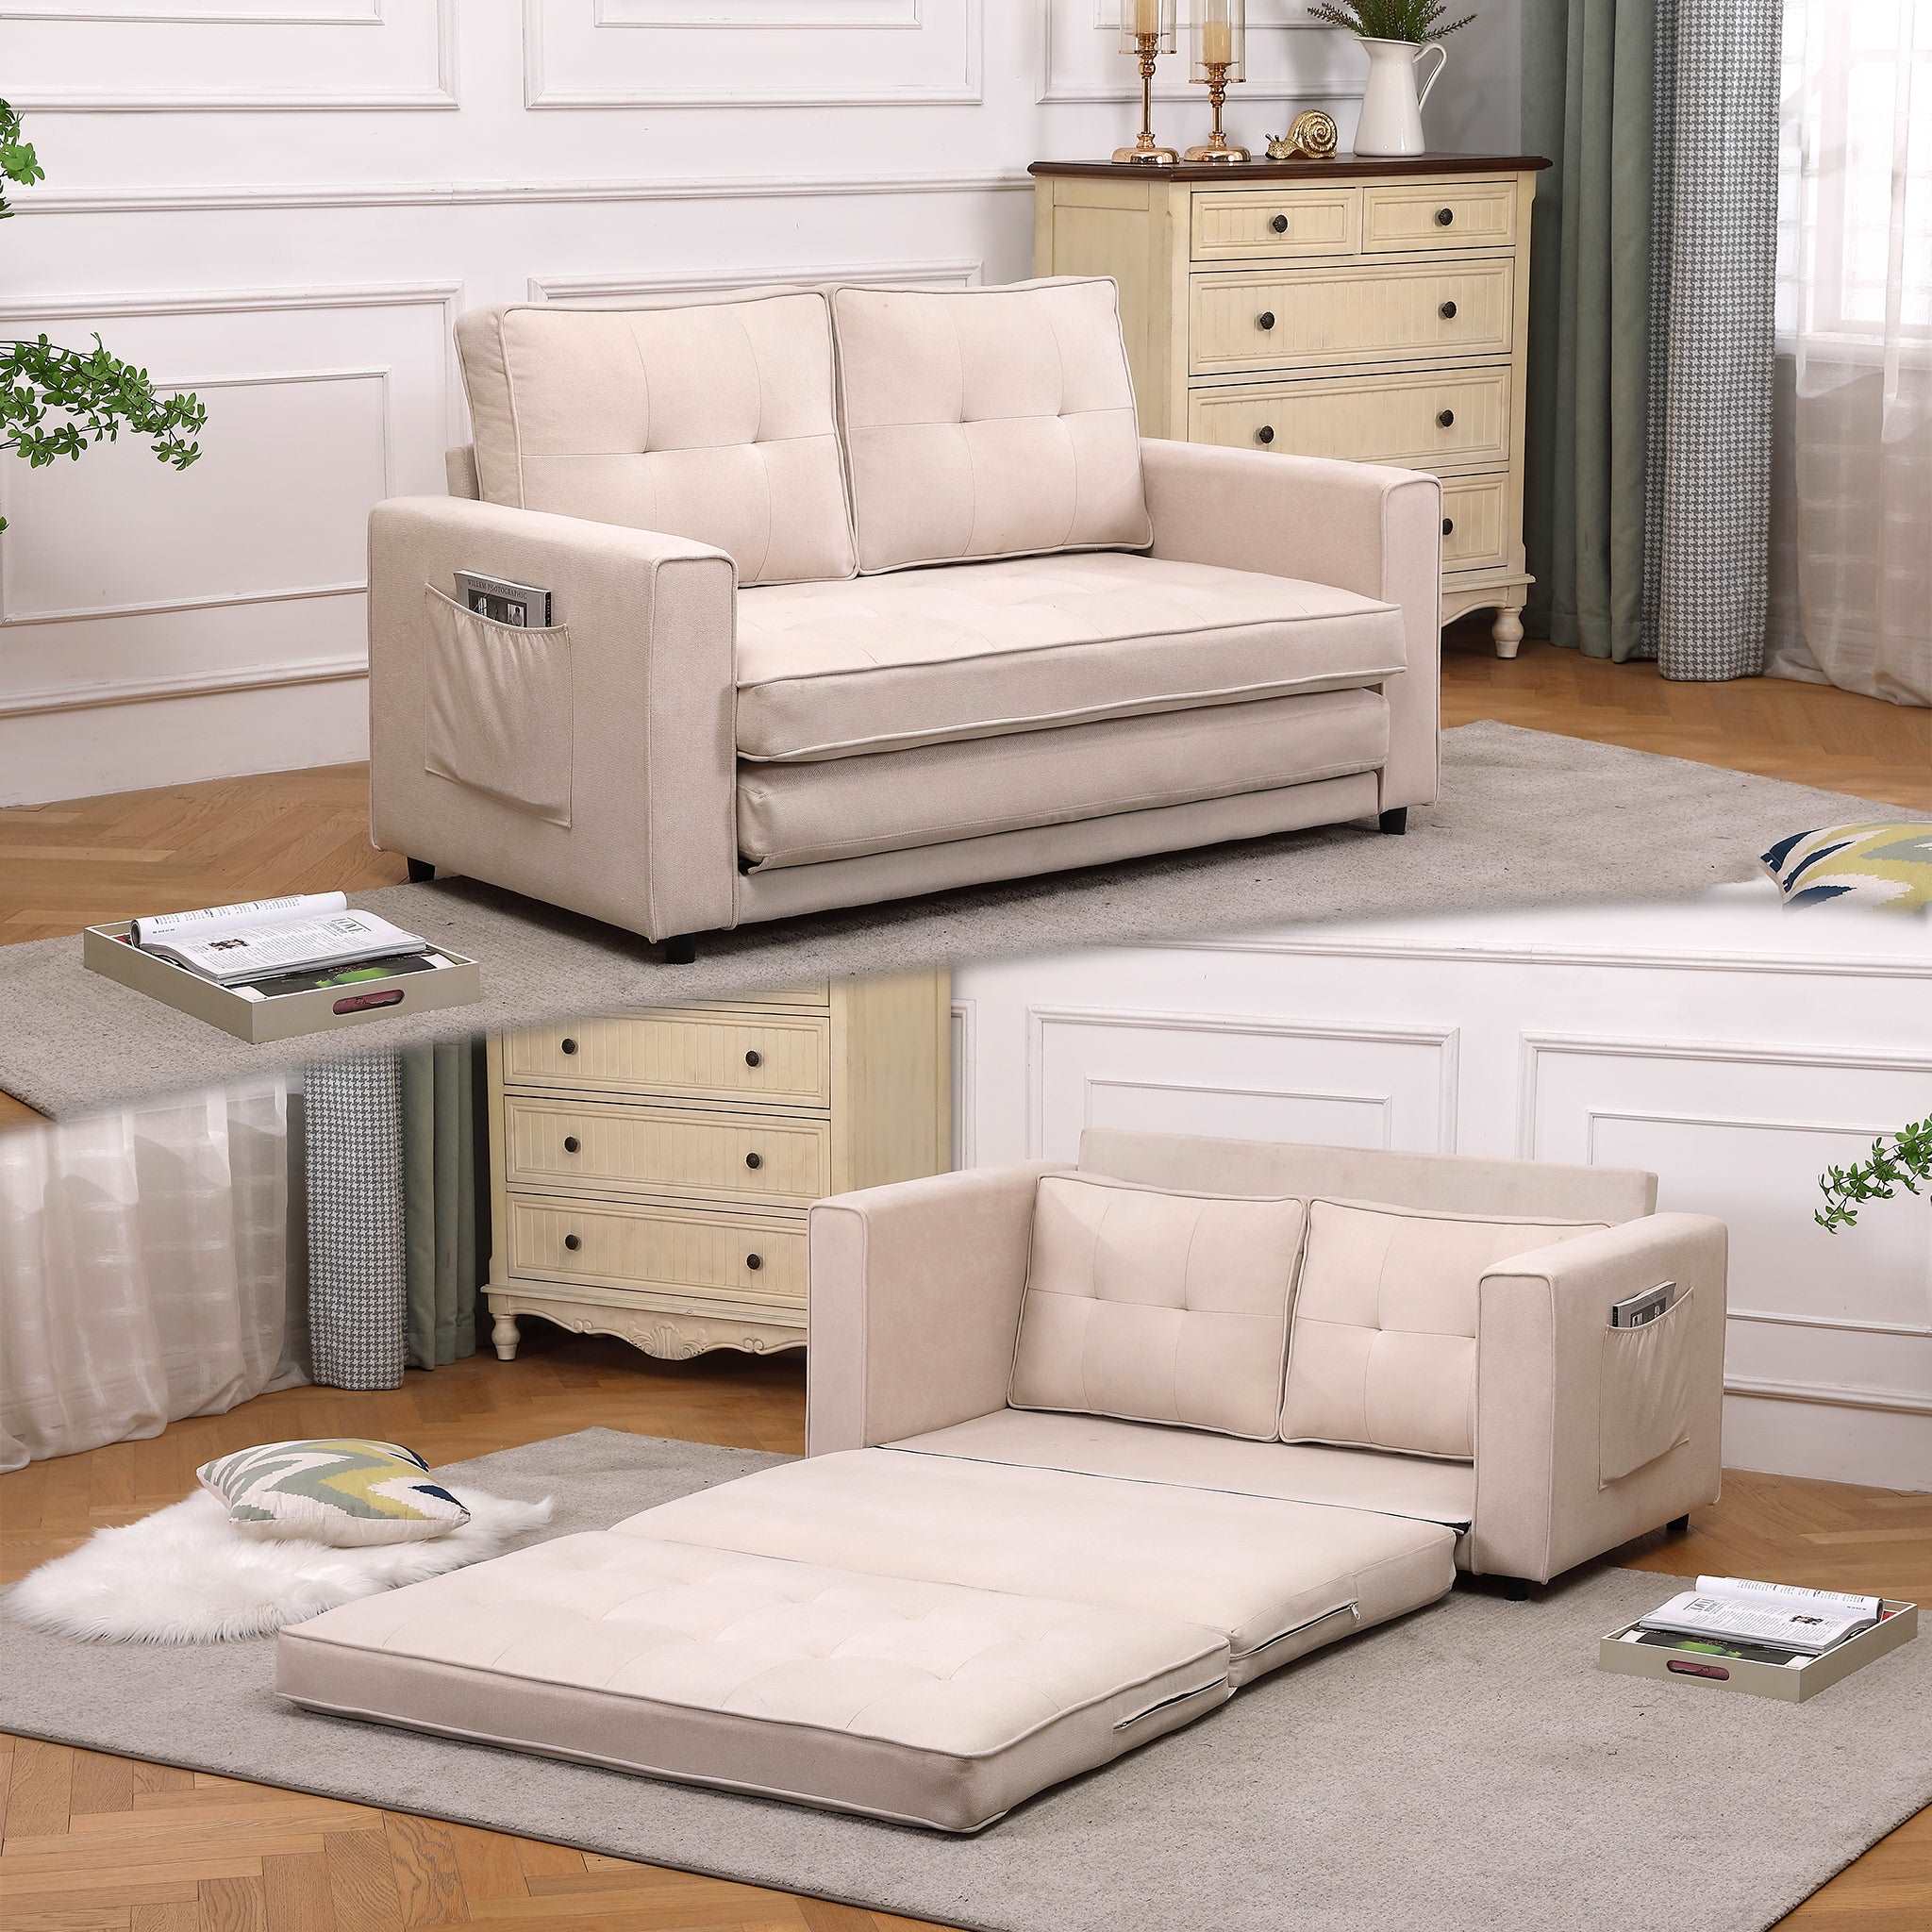 Bellemave 3-in-1 Upholstered Futon Sofa Convertible Floor Sofa bed,Foldable Tufted Loveseat